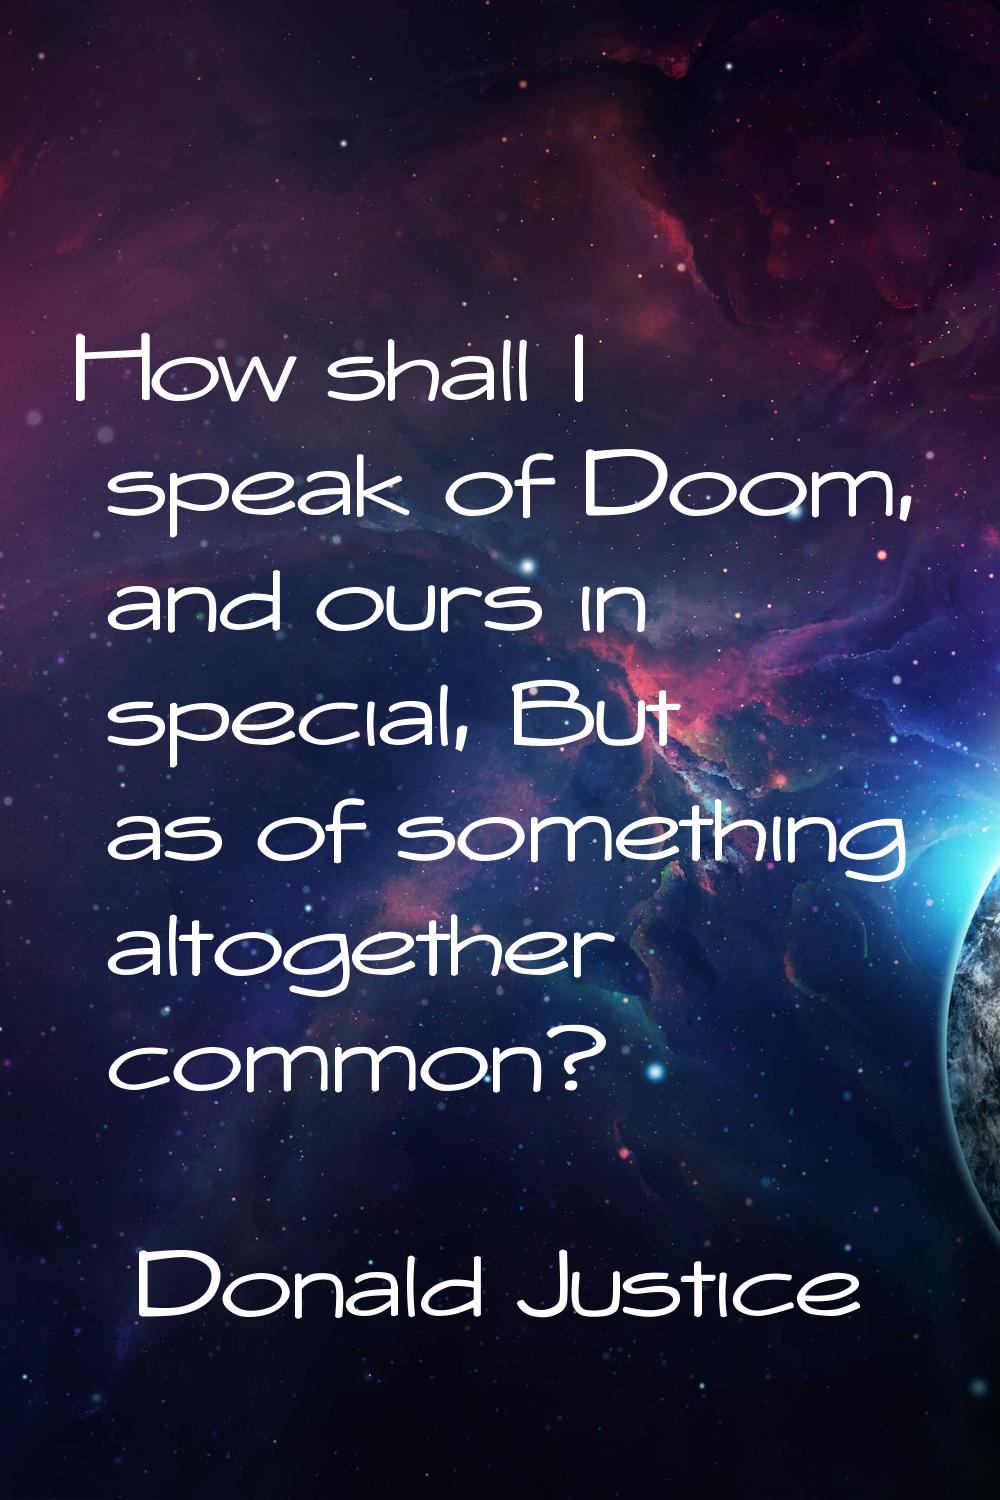 How shall I speak of Doom, and ours in special, But as of something altogether common?